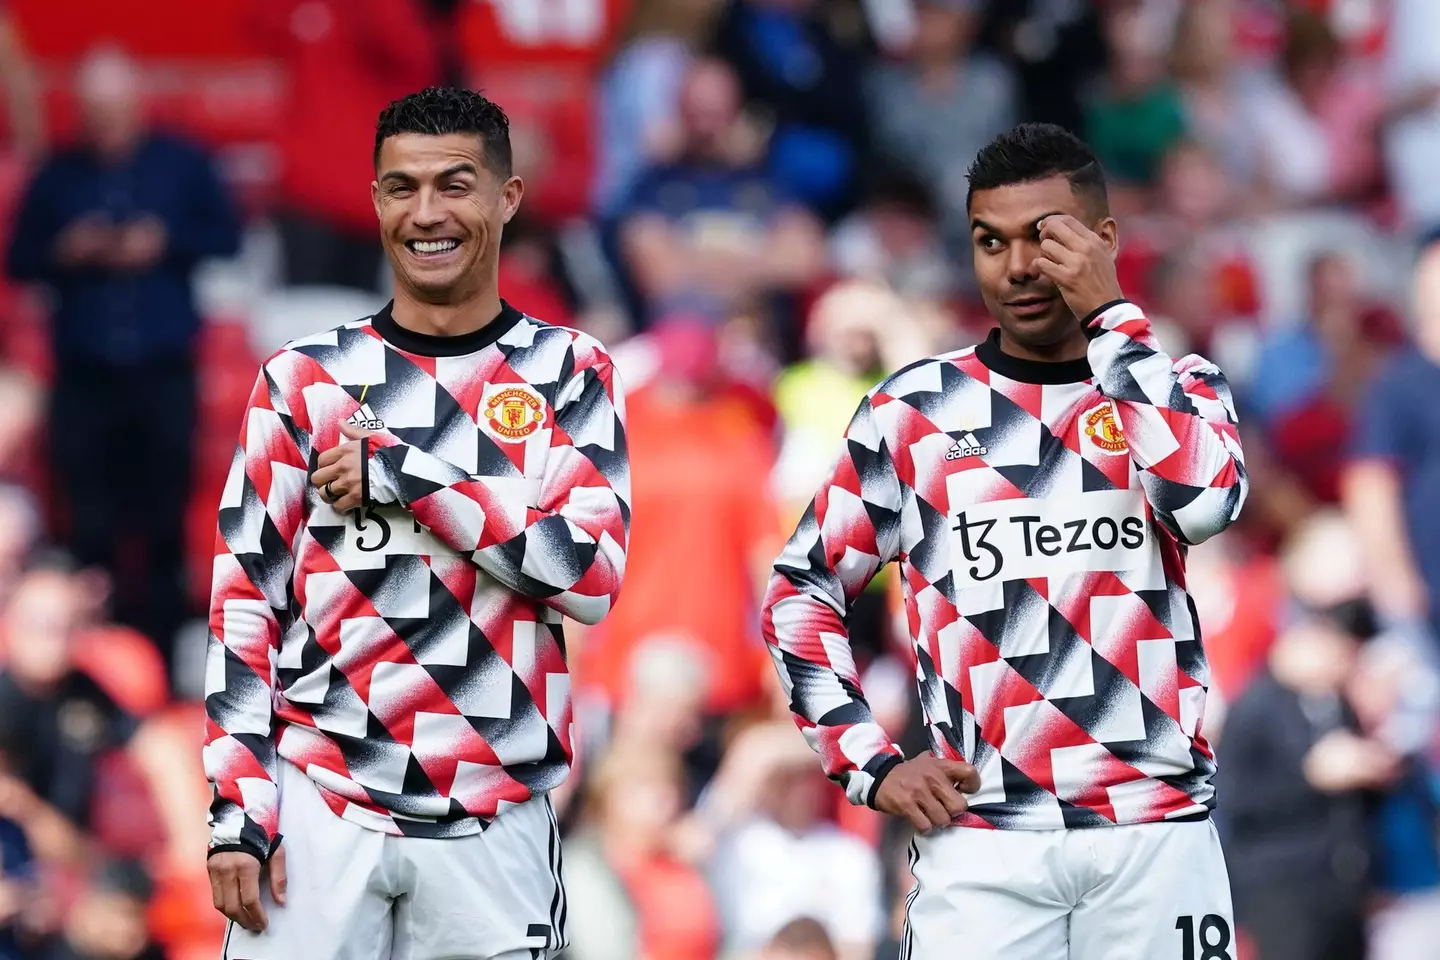 Ronaldo and Casemiro started on the bench together. Image: Alamy